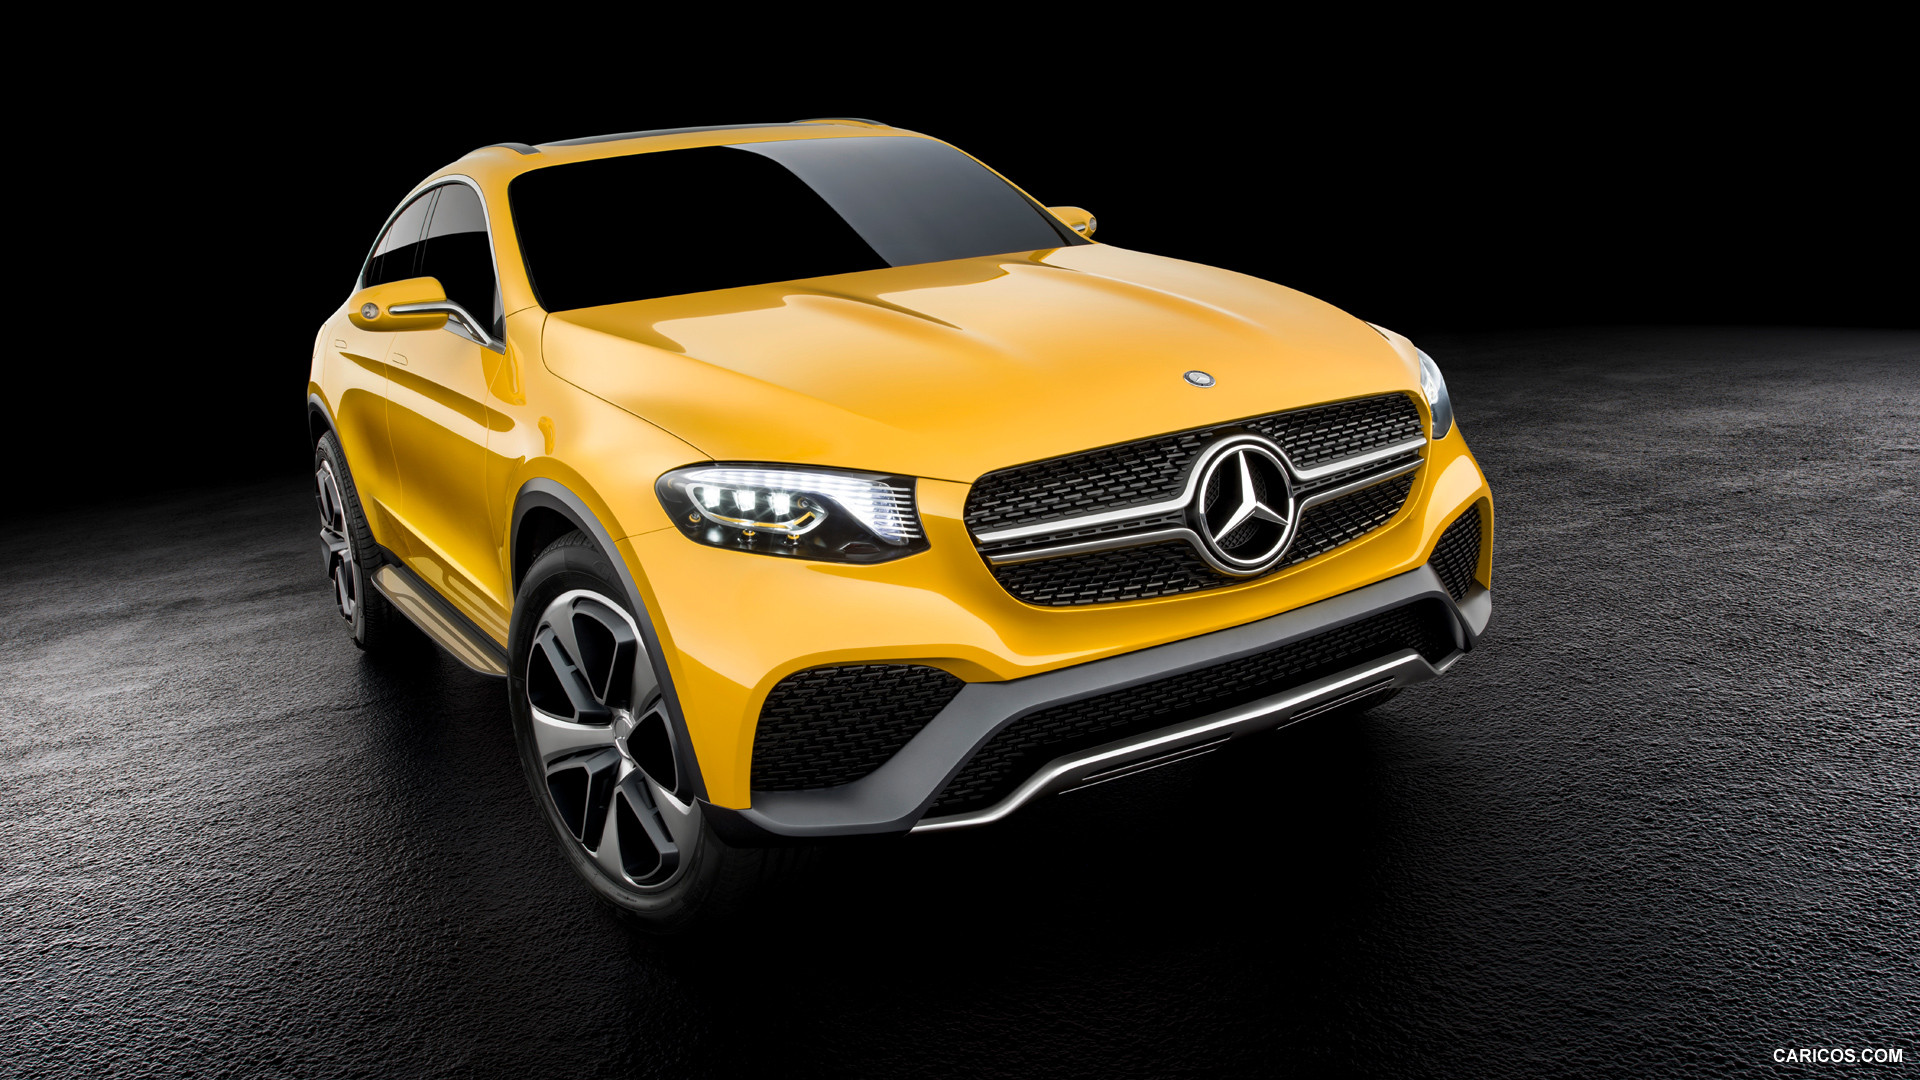 2015 Mercedes-Benz GLC Coupe Concept  - Front, #13 of 16